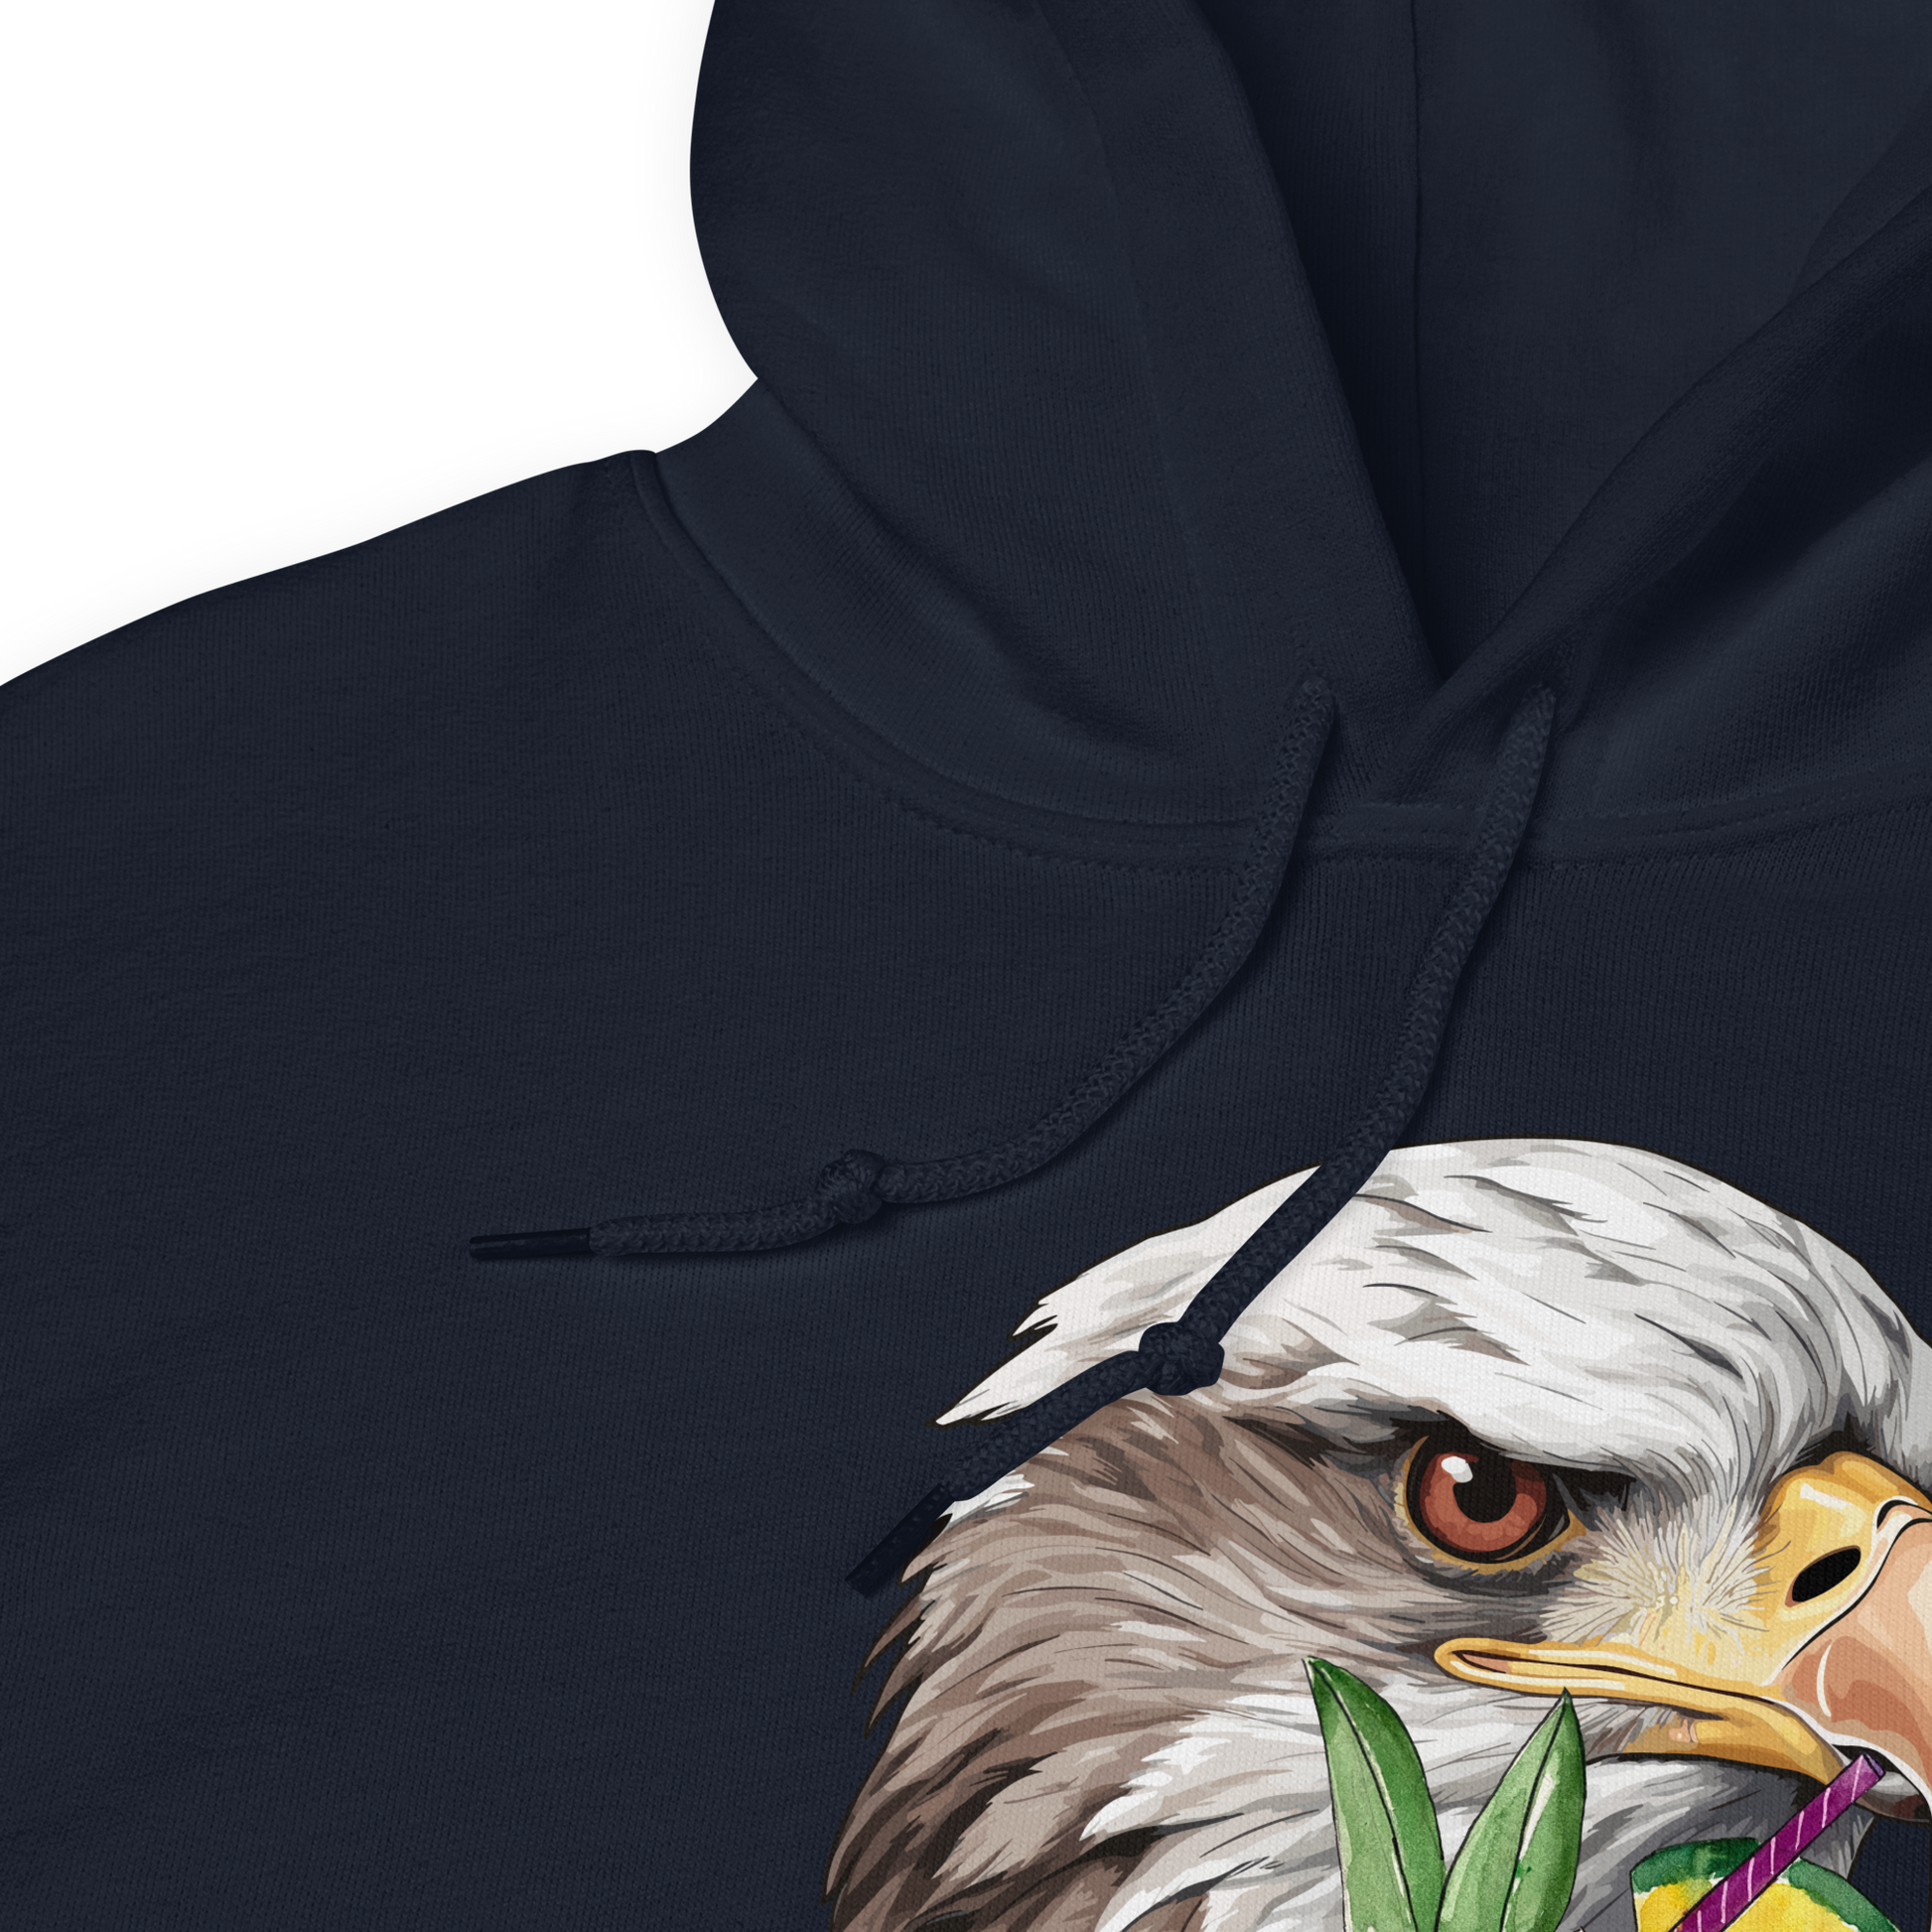 Product details of a Navy Eagle Hoodie featuring a captivating I Am Eagle To Party graphic on the chest - Funny Graphic Eagle Party Hoodies - Boozy Fox